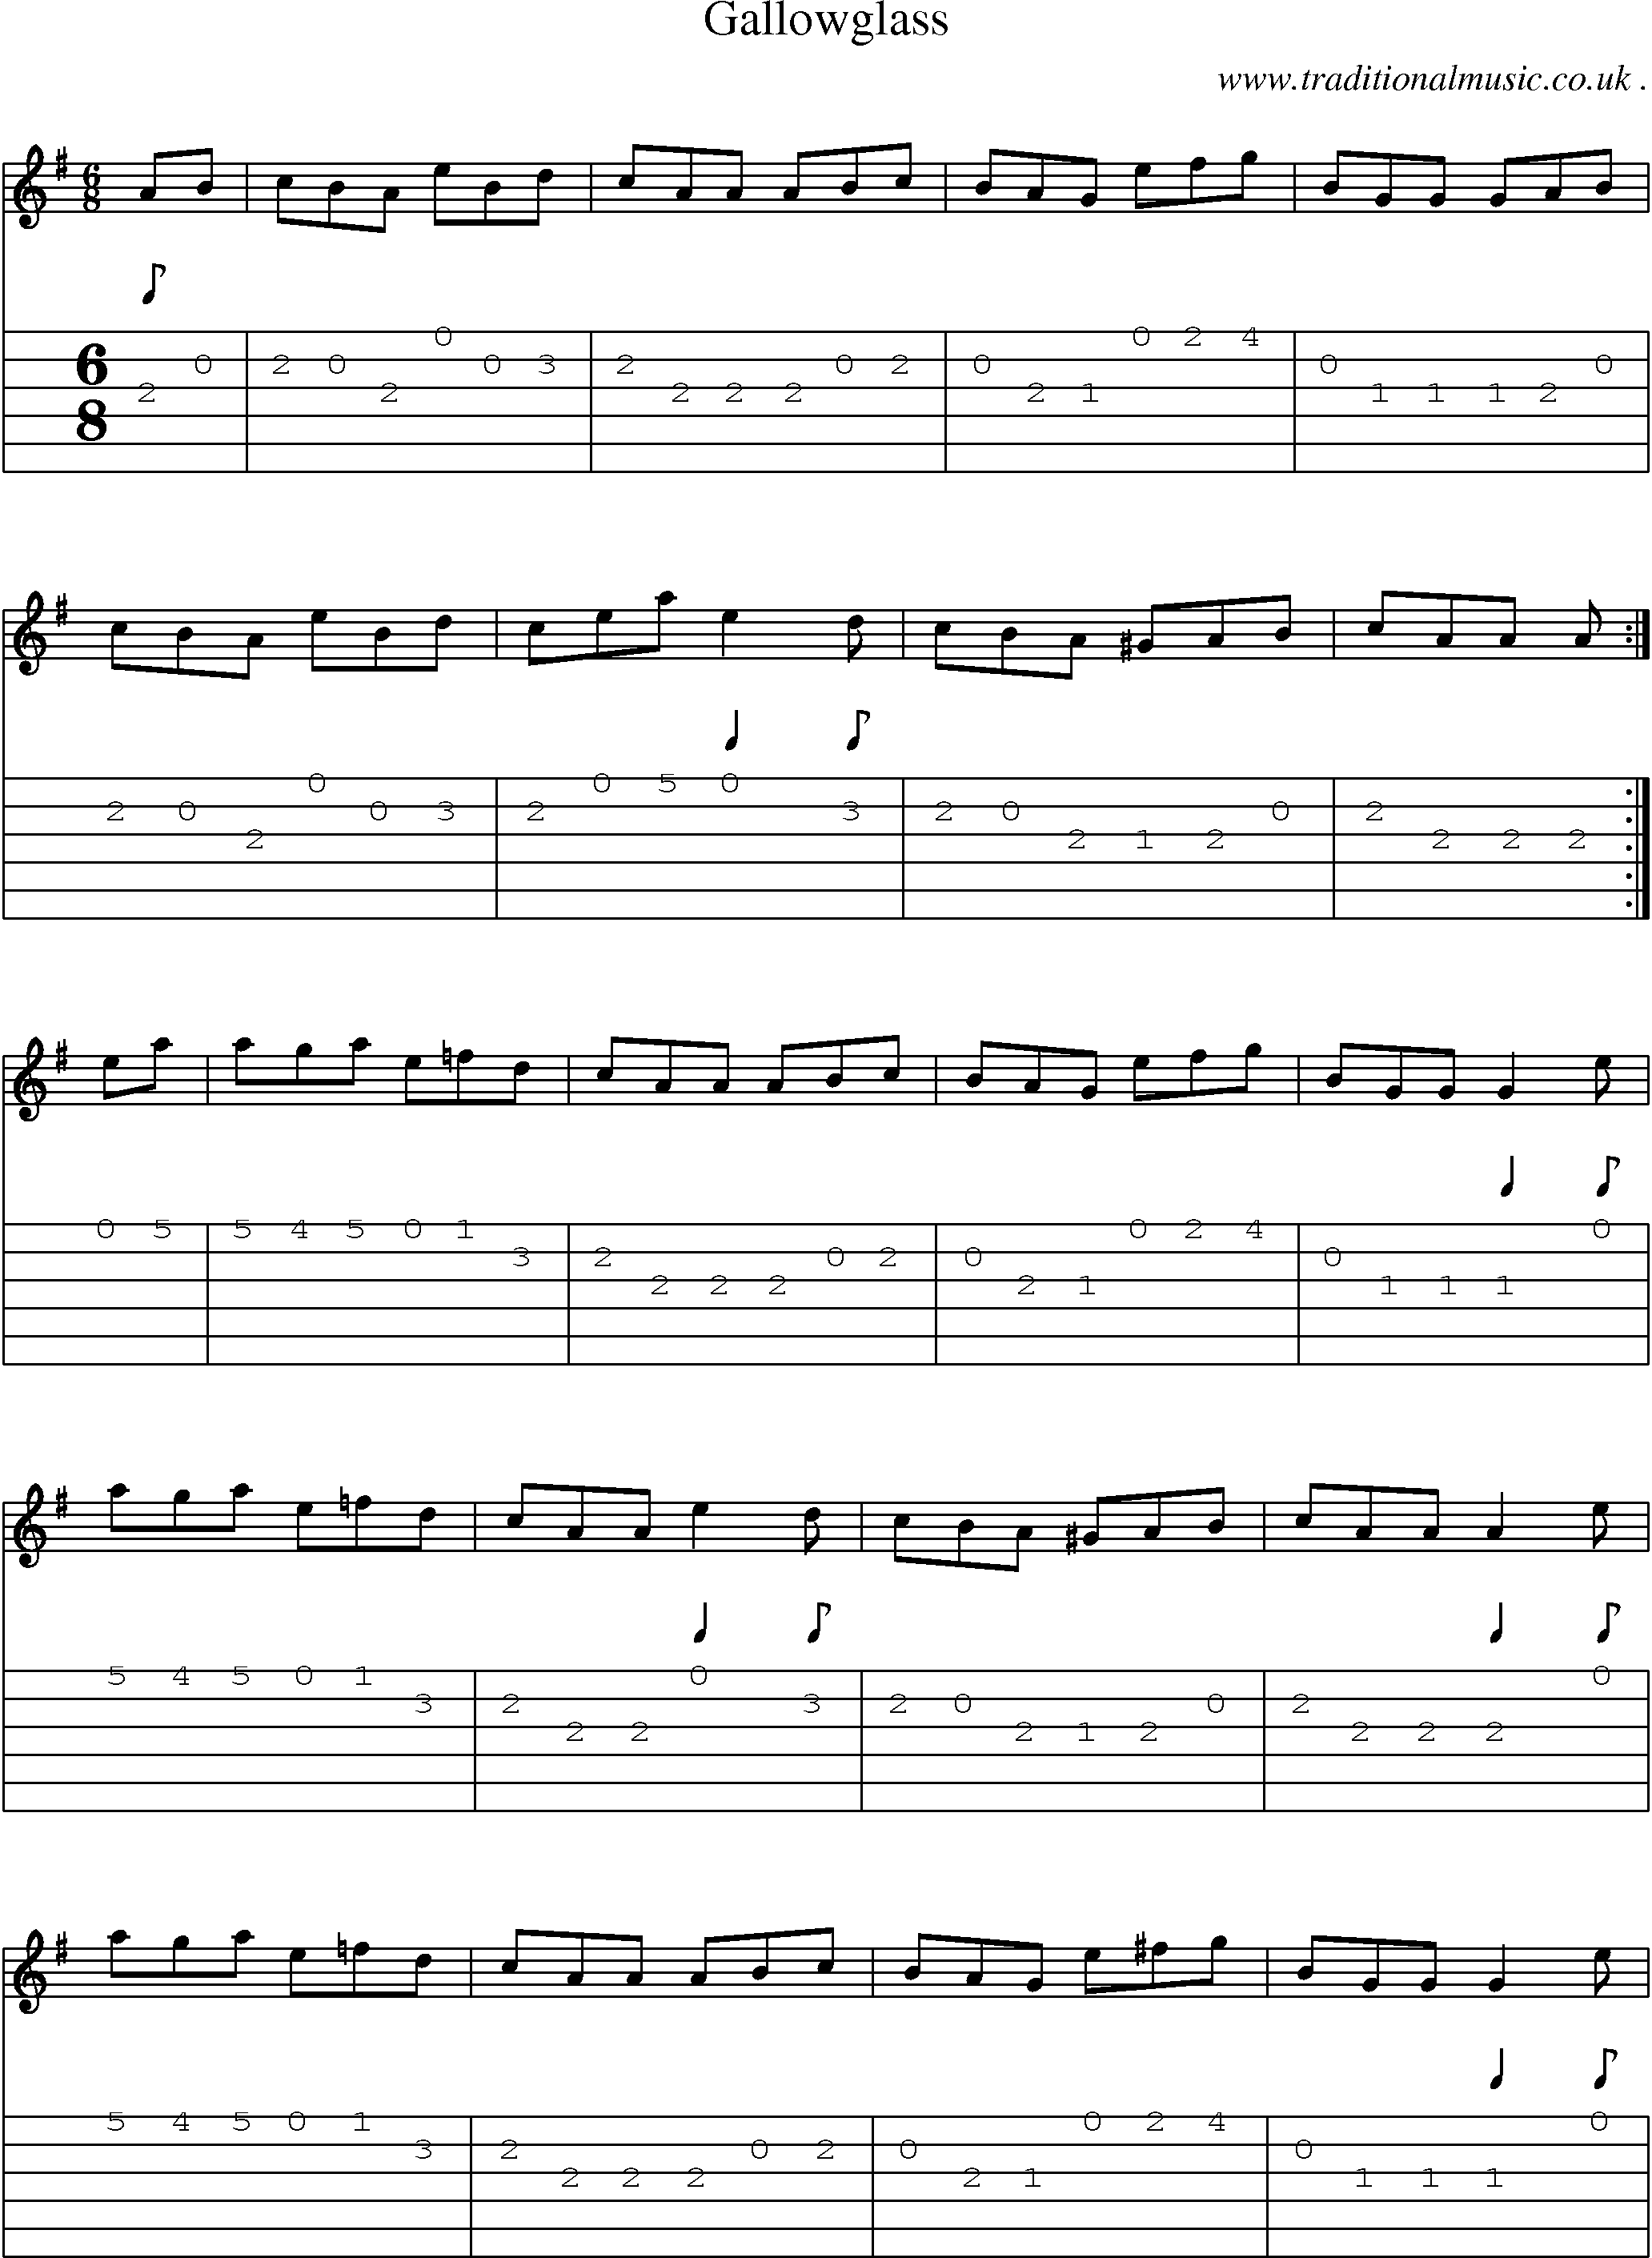 Sheet-Music and Guitar Tabs for Gallowglass